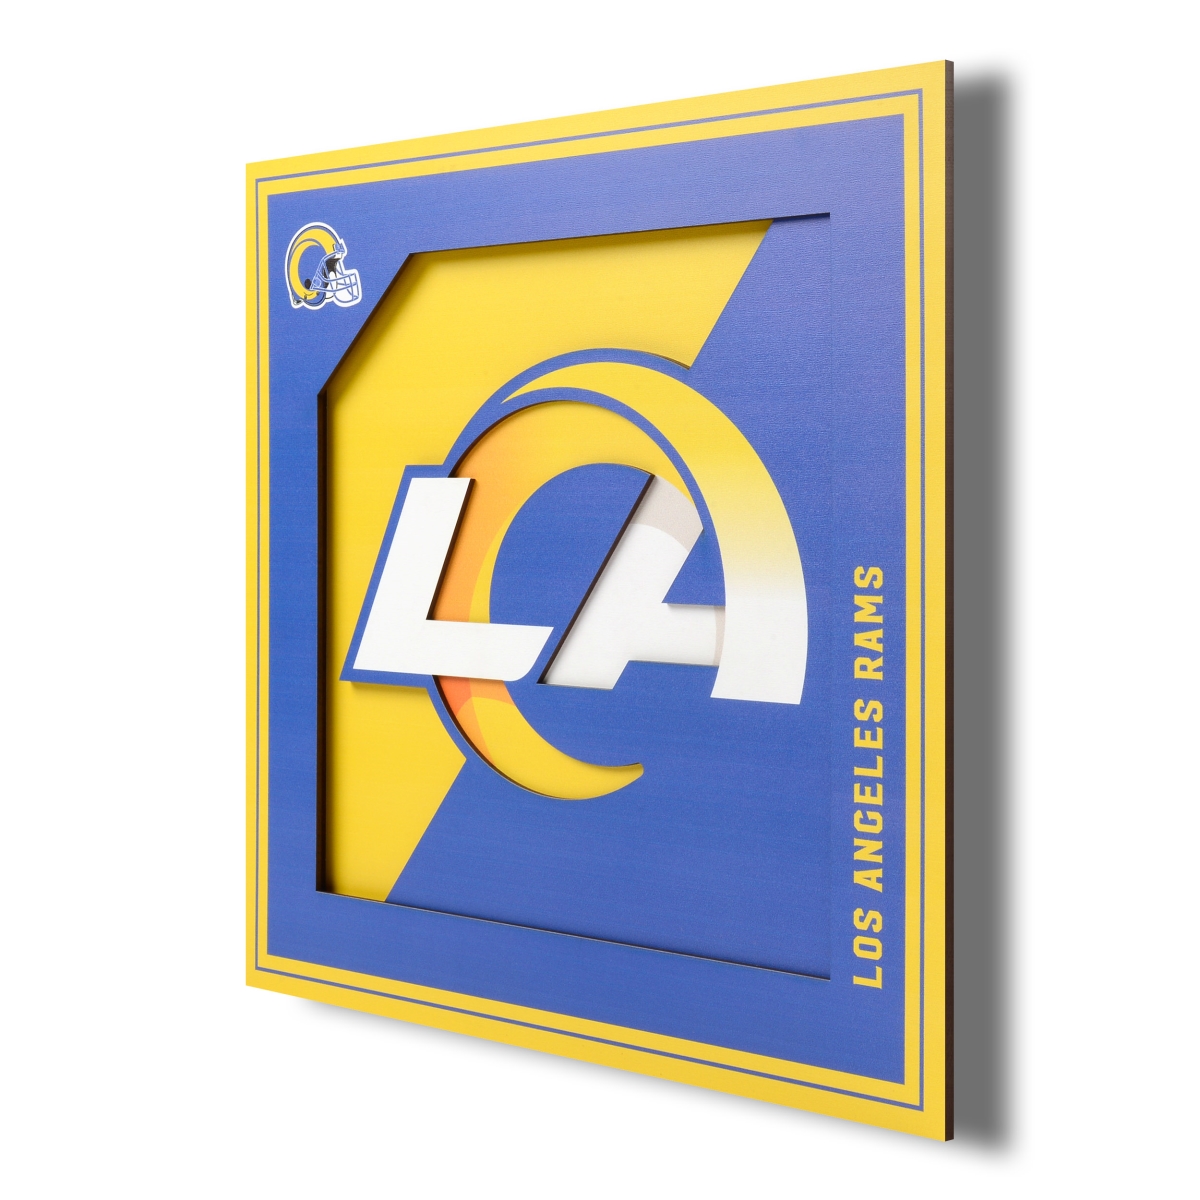 Online Shopping for Housewares, Baby Gear, Health & more. YouTheFan 1902601  12 x 12 in. NFL Los Angeles Rams 3D Logo Series Wall Art